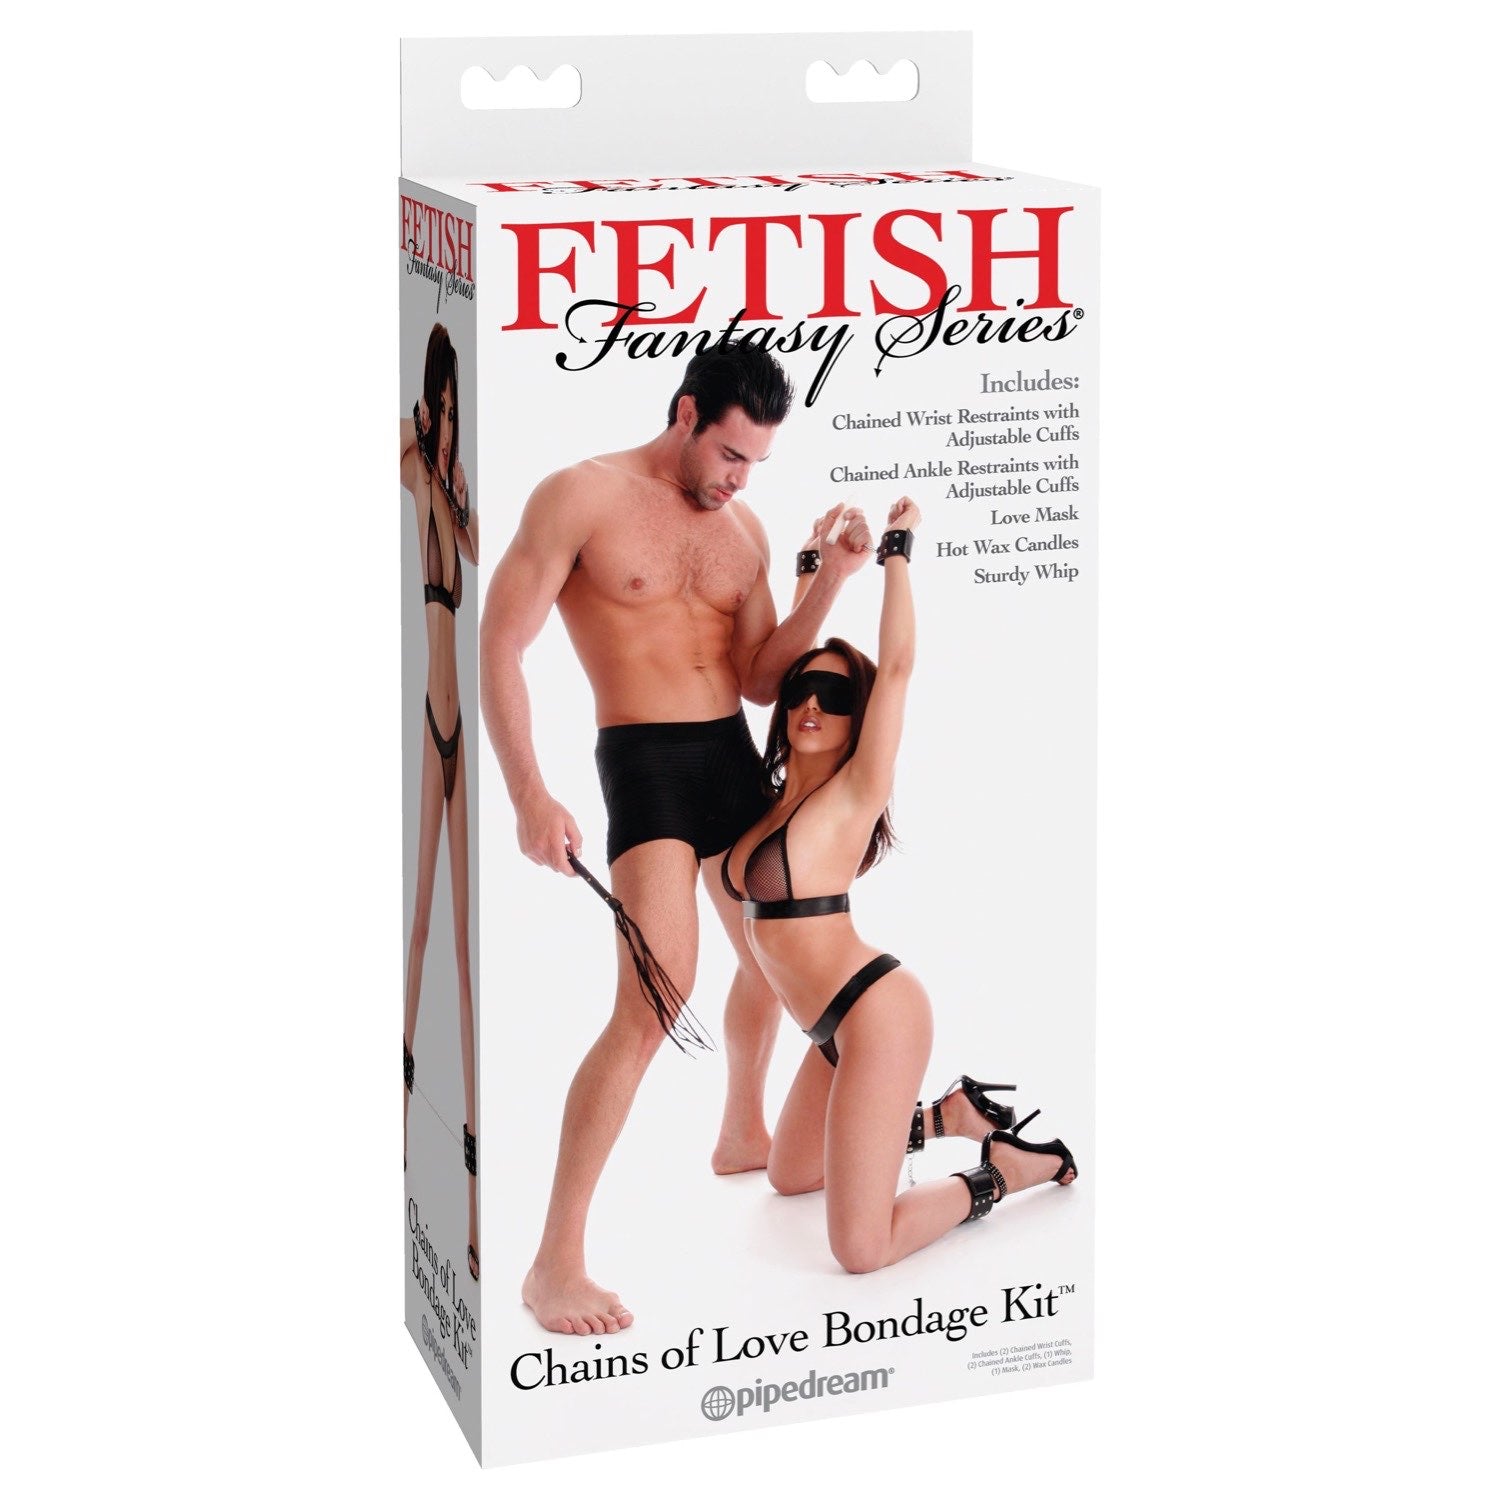 Fetish Fantasy Series Chains Of Love Bondage Kit - 5 Piece Set by Pipedream